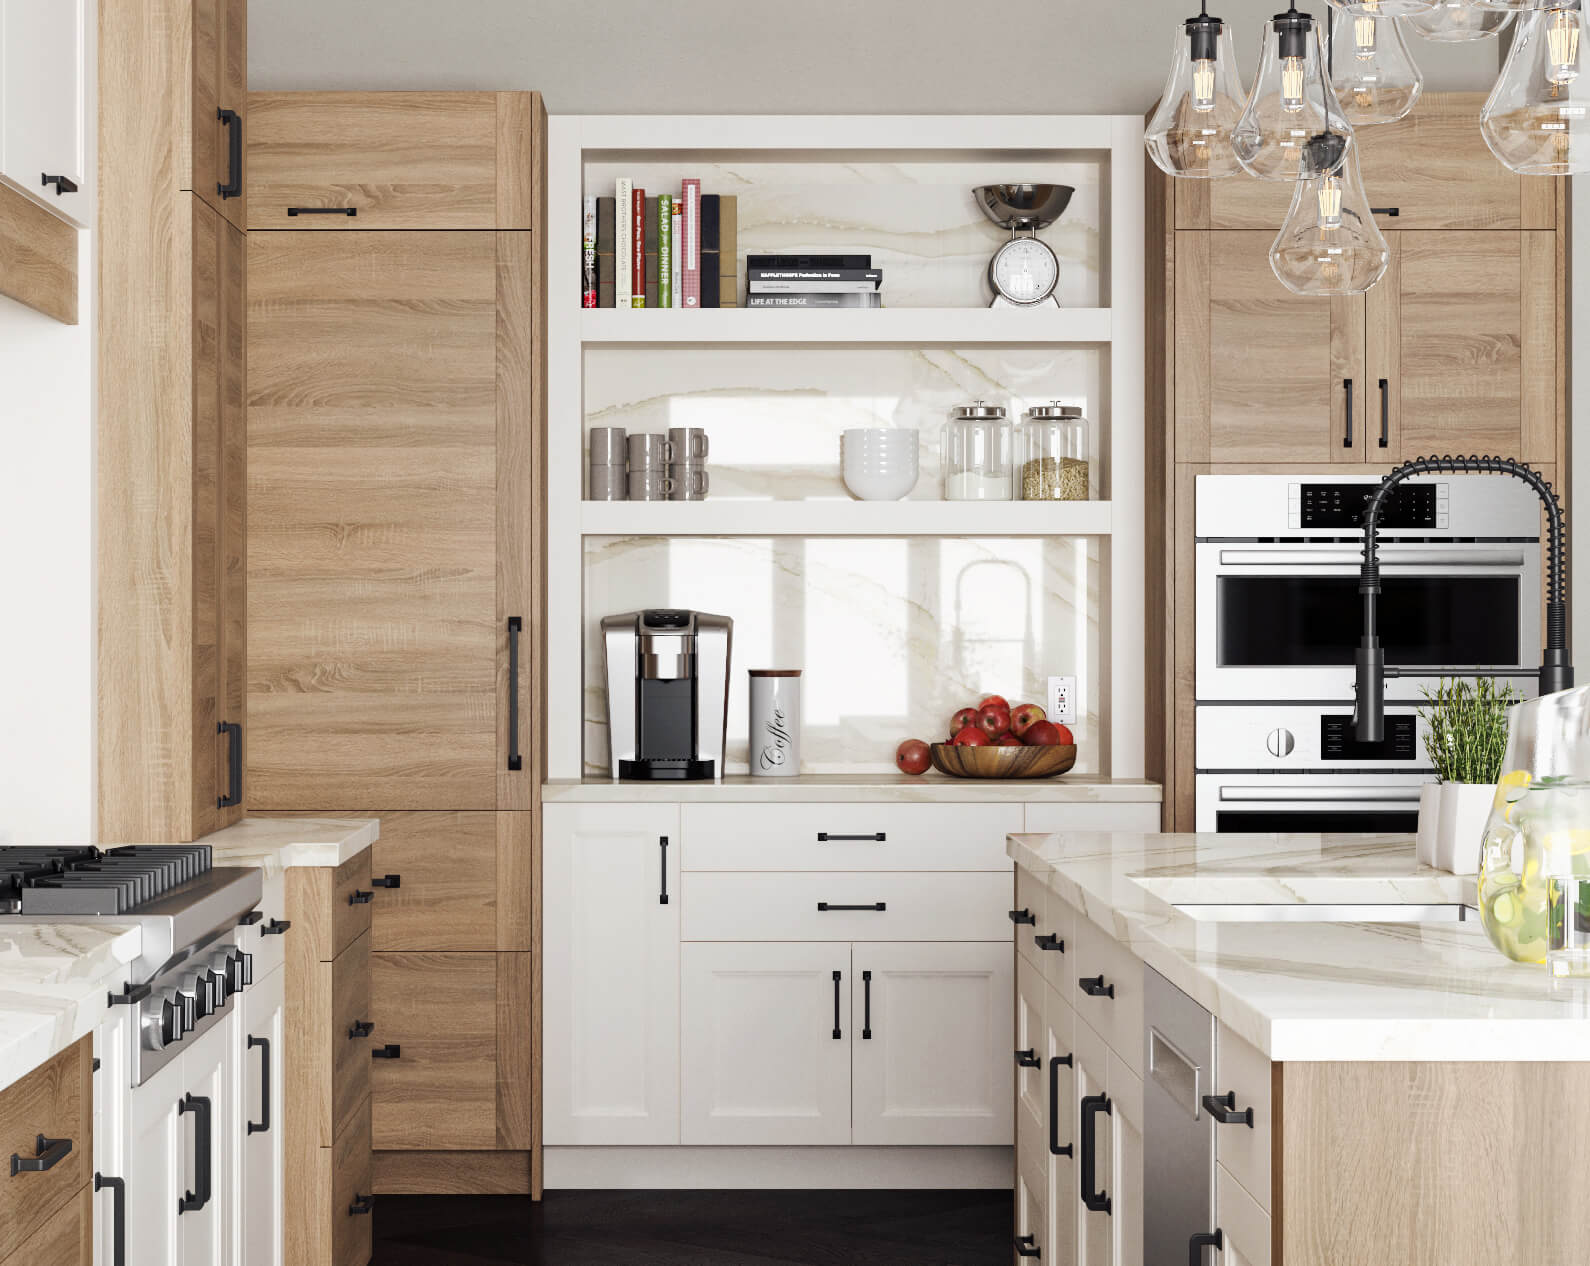 Kitchen Work Zones: How to Design a Coffee Bar Station - Dura Supreme  Cabinetry